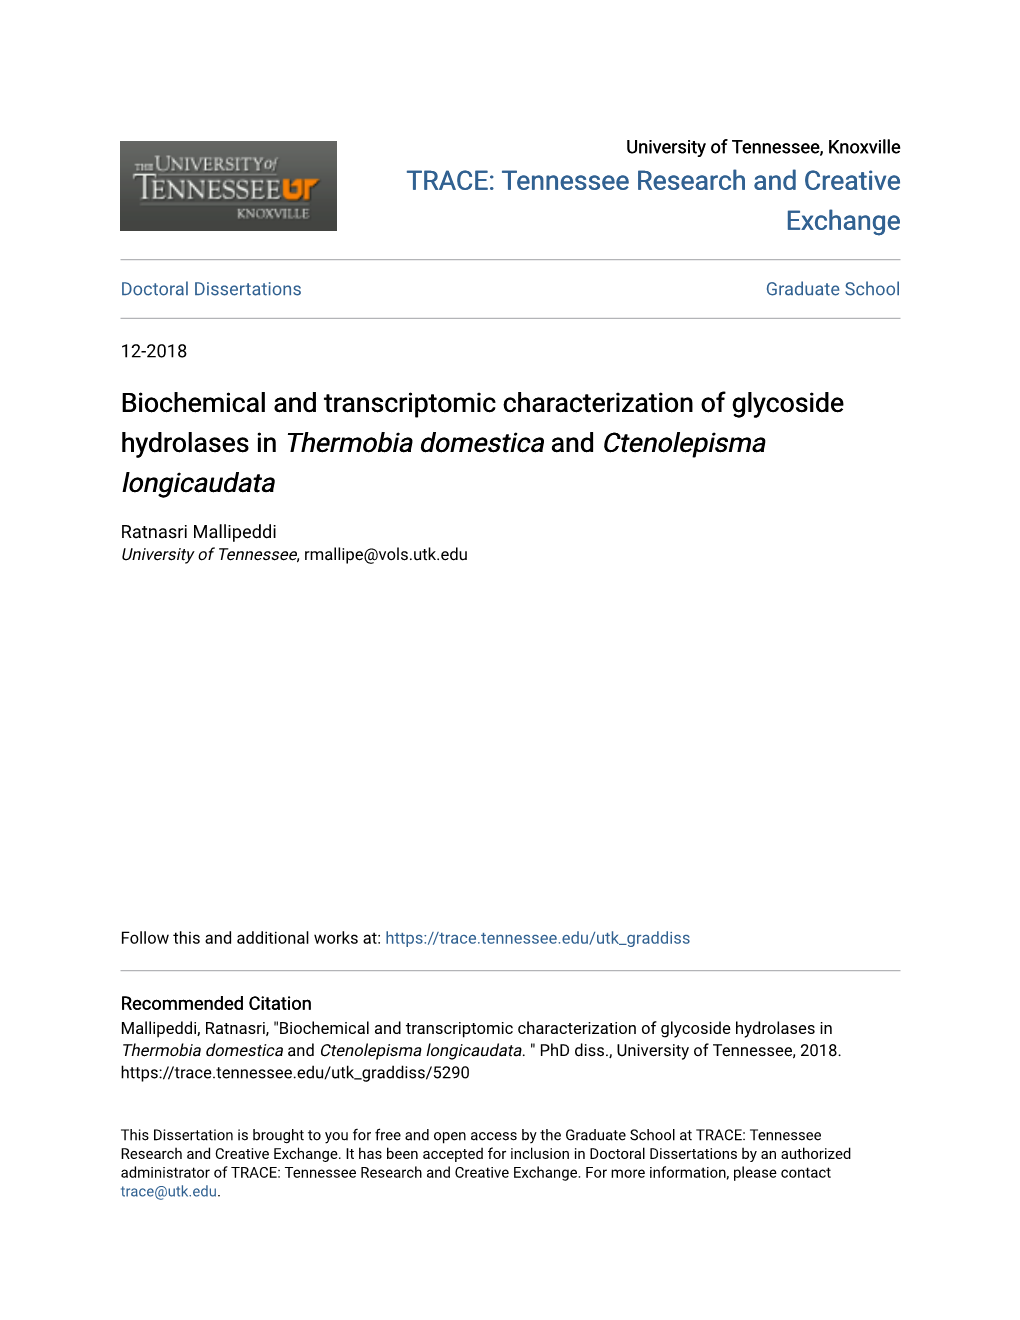 Biochemical and Transcriptomic Characterization of Glycoside Hydrolases in Thermobia Domestica and Ctenolepisma Longicaudata